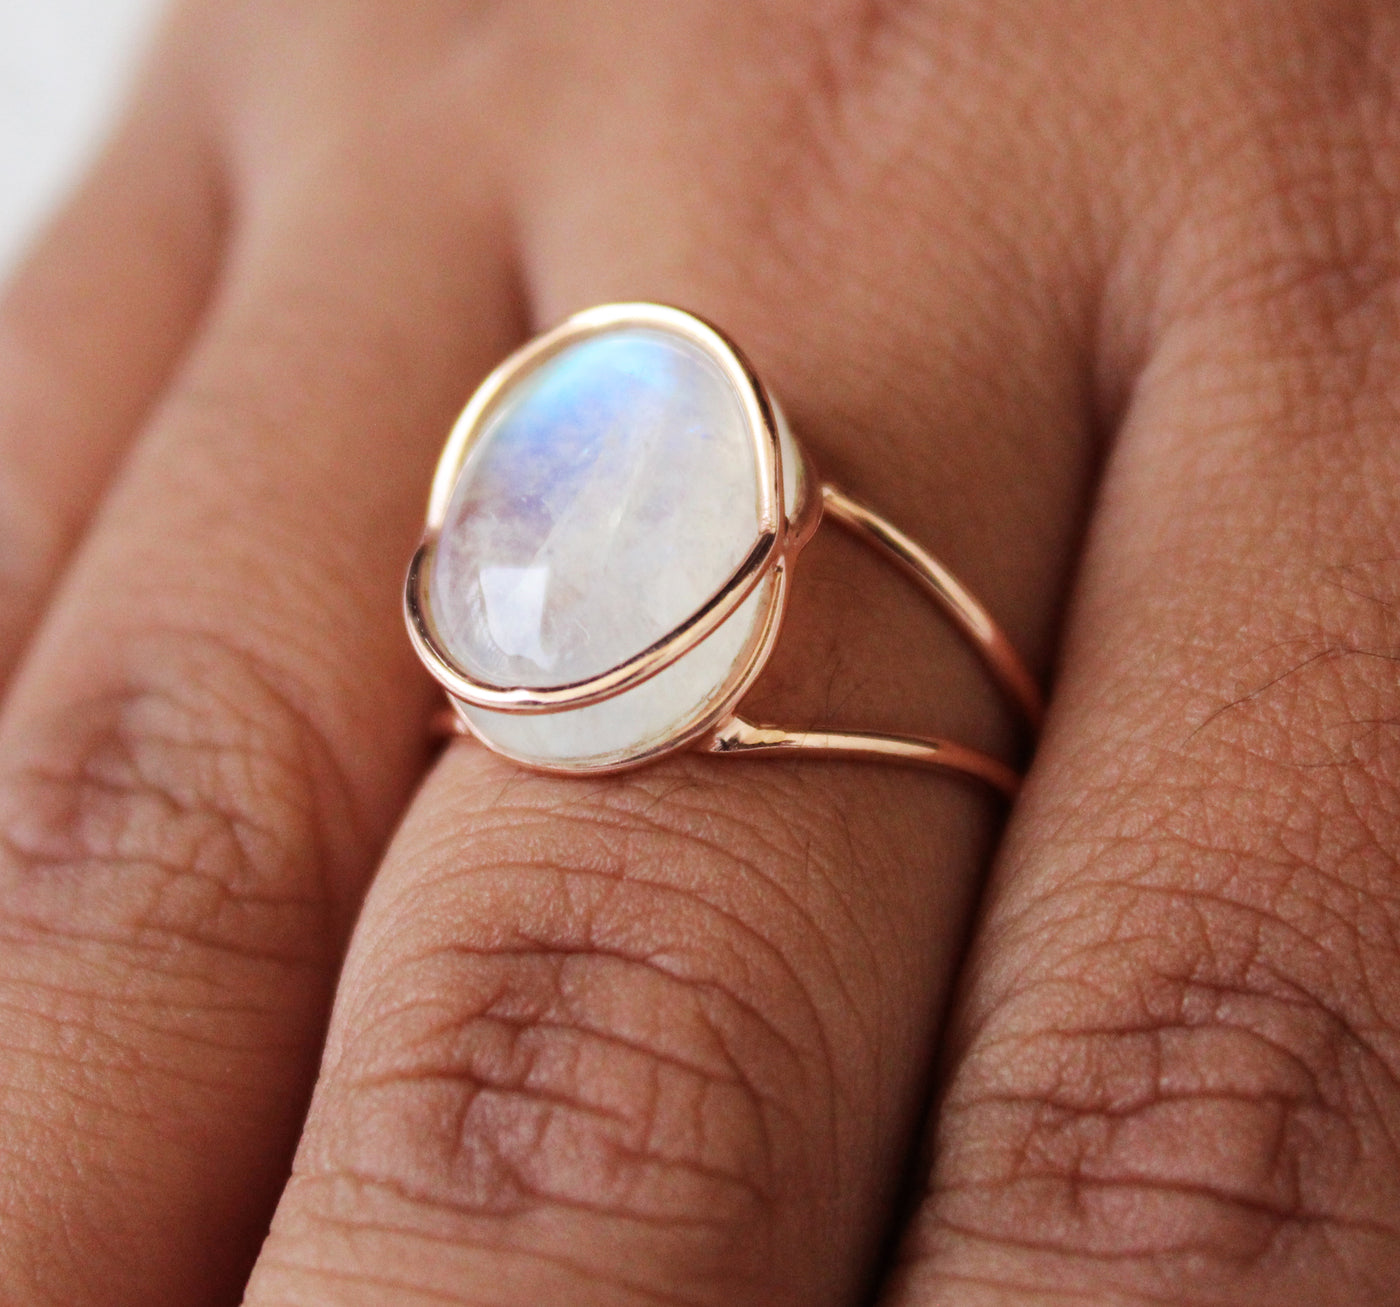 Rainbow moonstone Ring , Blue Flash Ring, Rose gold Ring, Solid 925 Sterling Silver, Oval Cabochon Gemstone, Blue sheen Gemstone